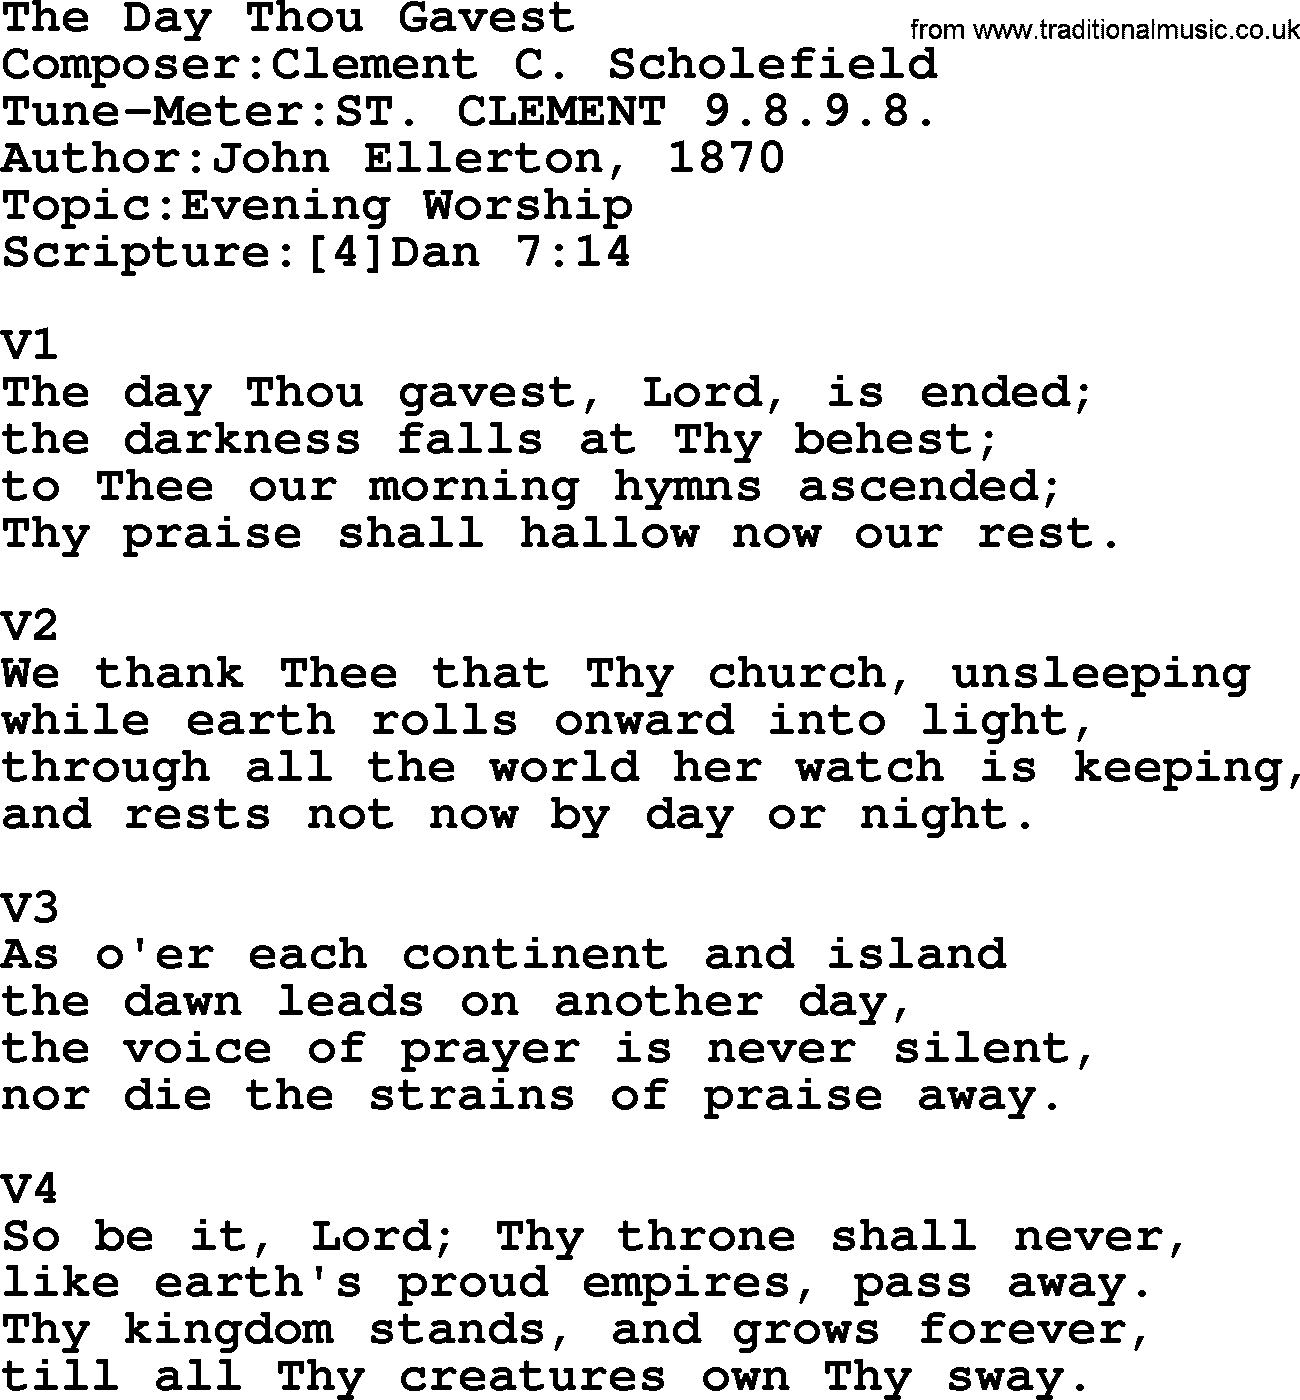 Adventist Hynms collection, Hymn: The Day Thou Gavest, lyrics with PDF